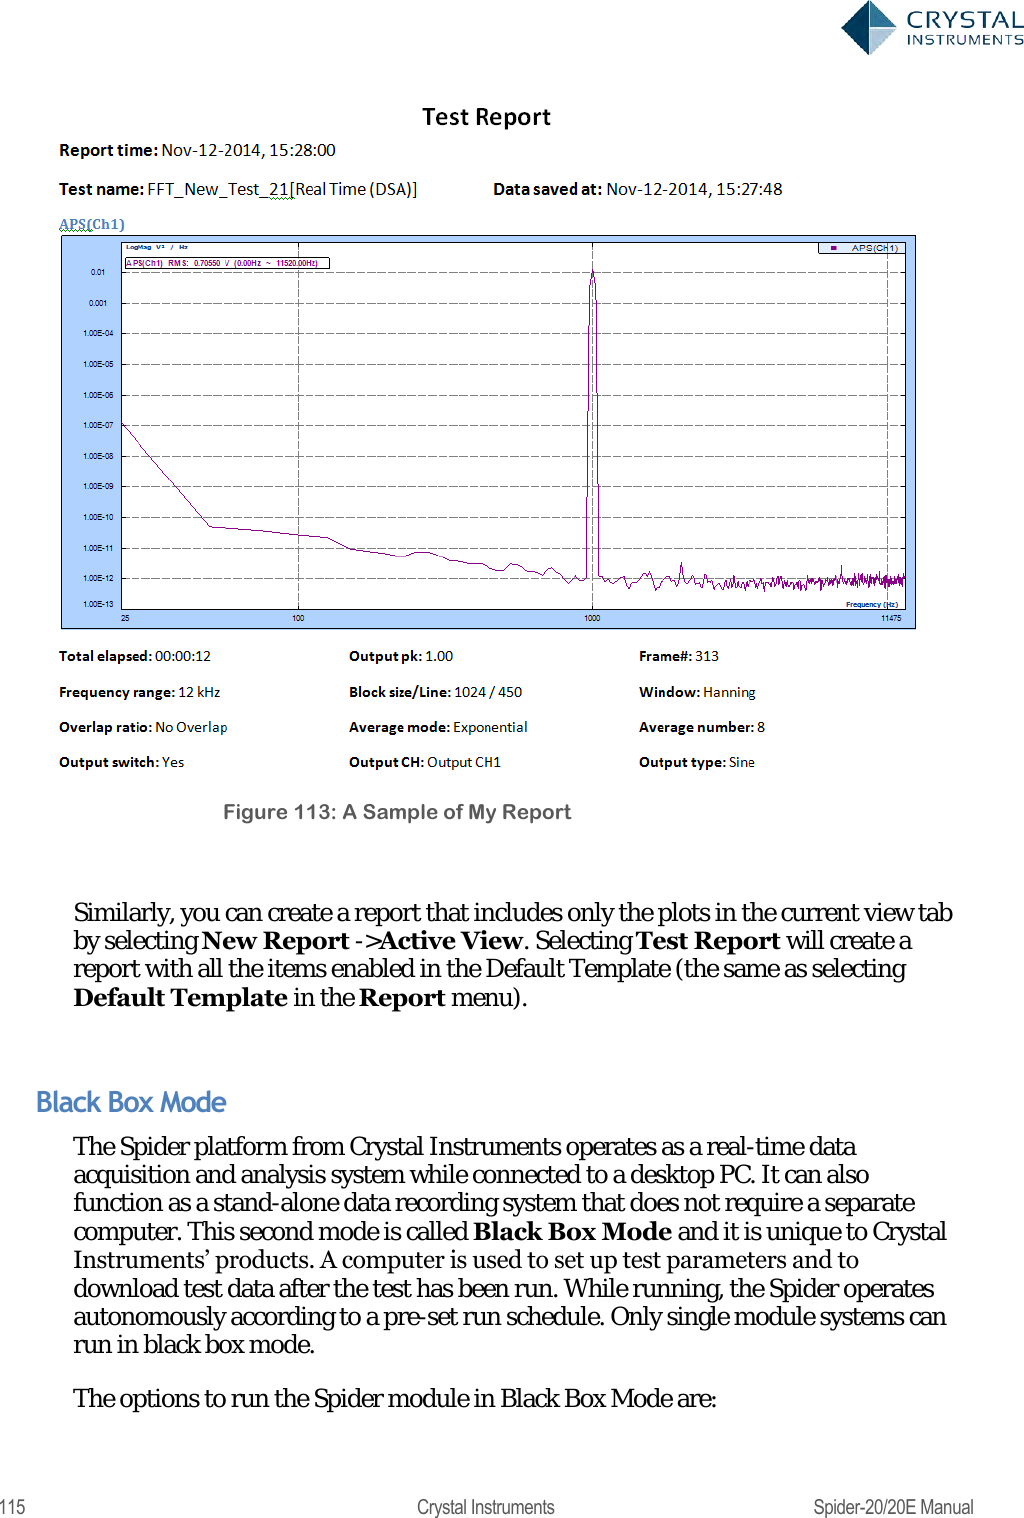  115  Crystal Instruments  Spider-20/20E Manual  Figure 113: A Sample of My Report  Similarly, you can create a report that includes only the plots in the current view tab by selecting New Report -&gt;Active View. Selecting Test Report will create a report with all the items enabled in the Default Template (the same as selecting Default Template in the Report menu).  Black Box Mode The Spider platform from Crystal Instruments operates as a real-time data acquisition and analysis system while connected to a desktop PC. It can also function as a stand-alone data recording system that does not require a separate computer. This second mode is called Black Box Mode and it is unique to Crystal Instruments‘ products. A computer is used to set up test parameters and to download test data after the test has been run. While running, the Spider operates autonomously according to a pre-set run schedule. Only single module systems can run in black box mode. The options to run the Spider module in Black Box Mode are: 